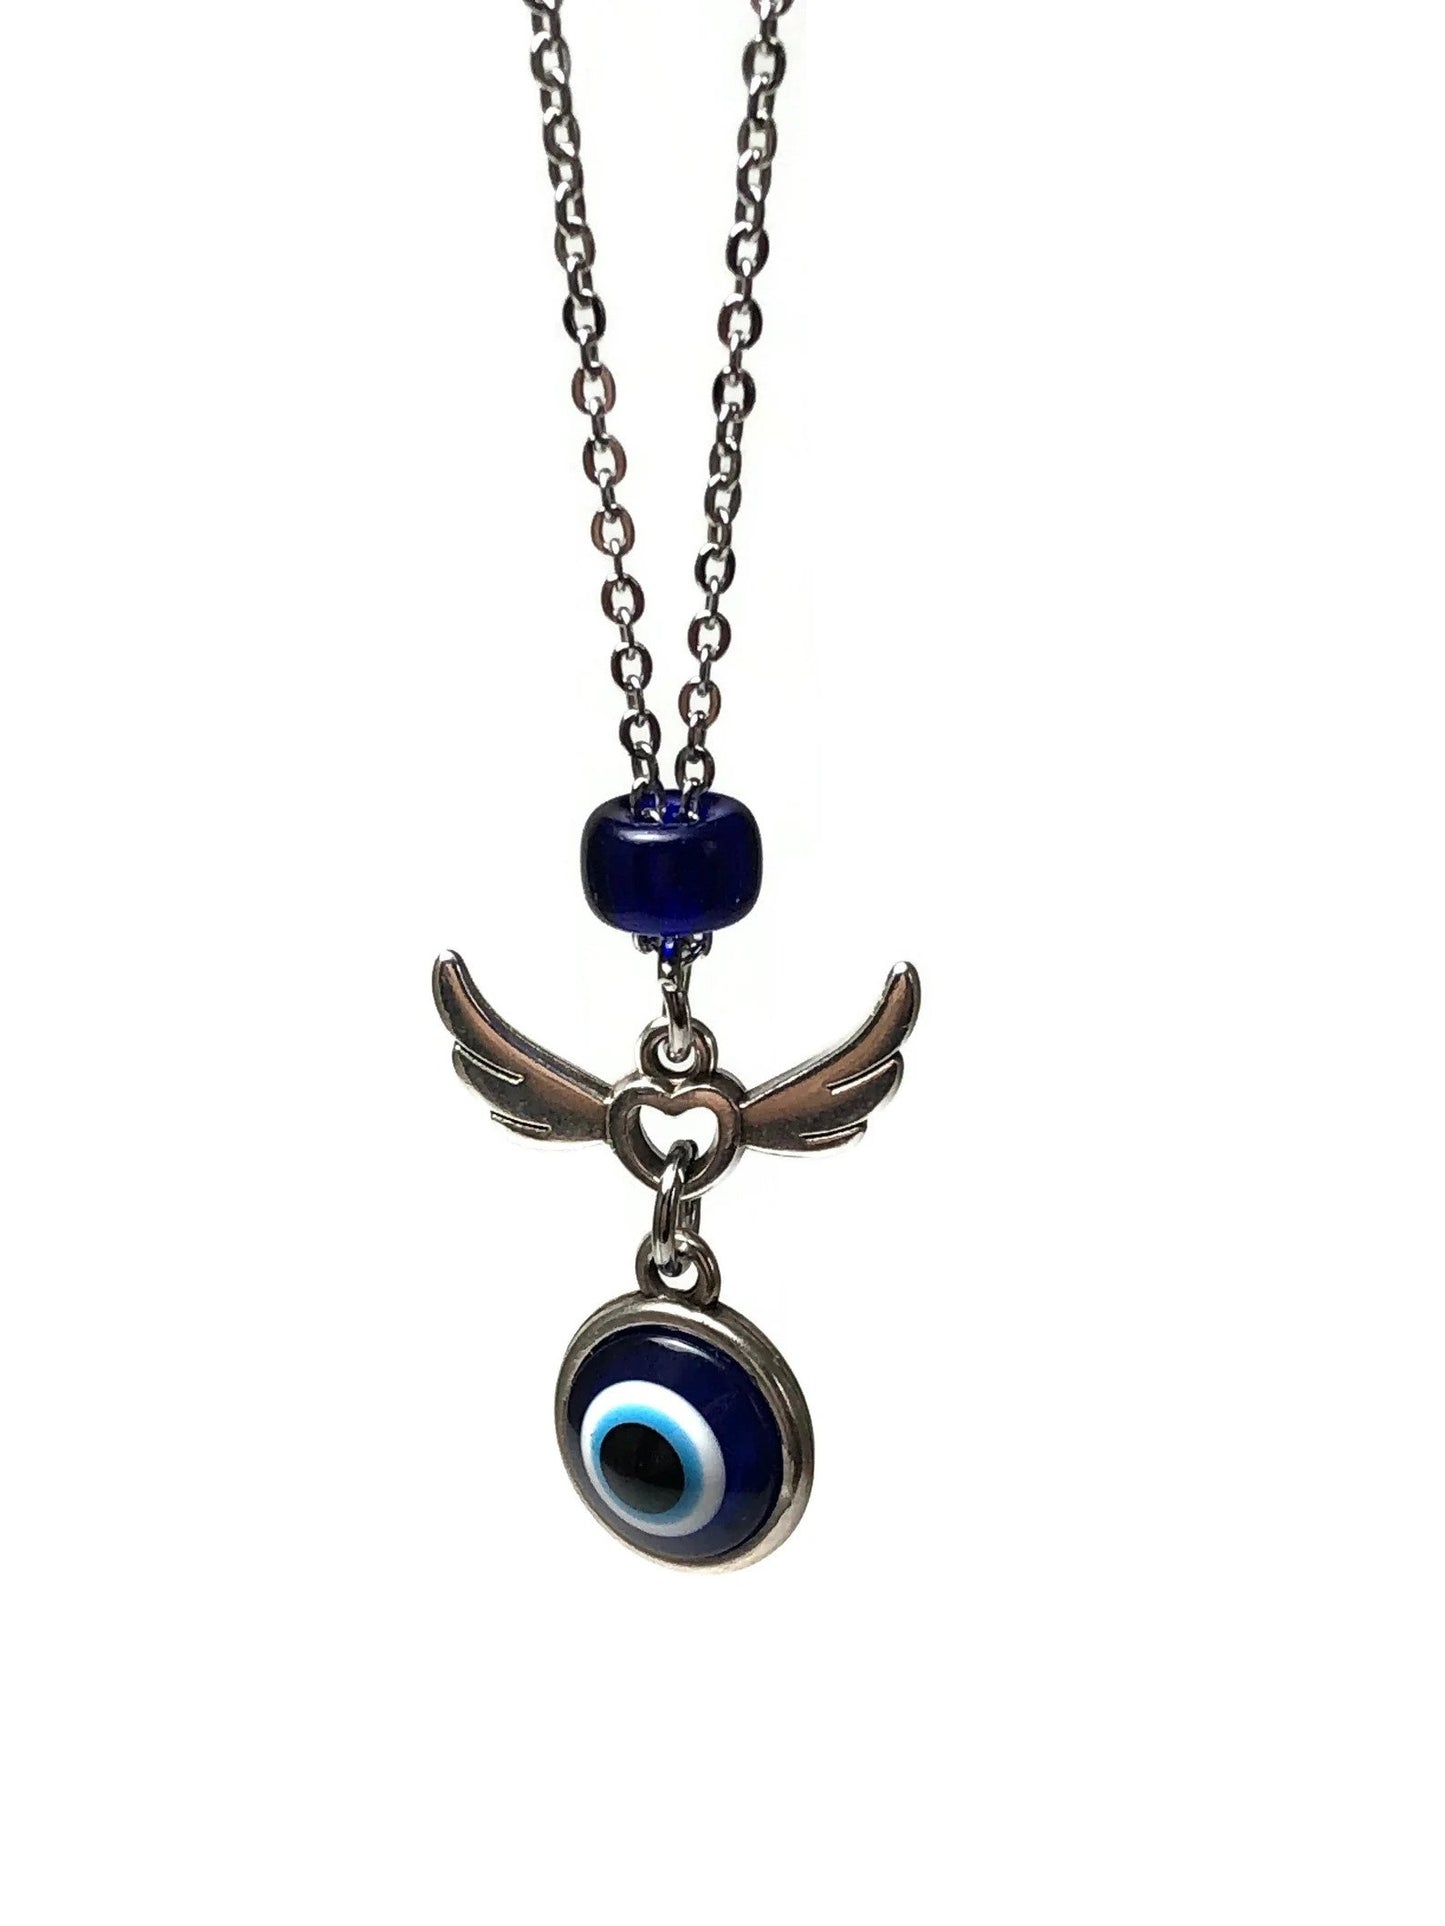 Angel Evil eye Rearview Mirror charm - new car gift - Car accessories